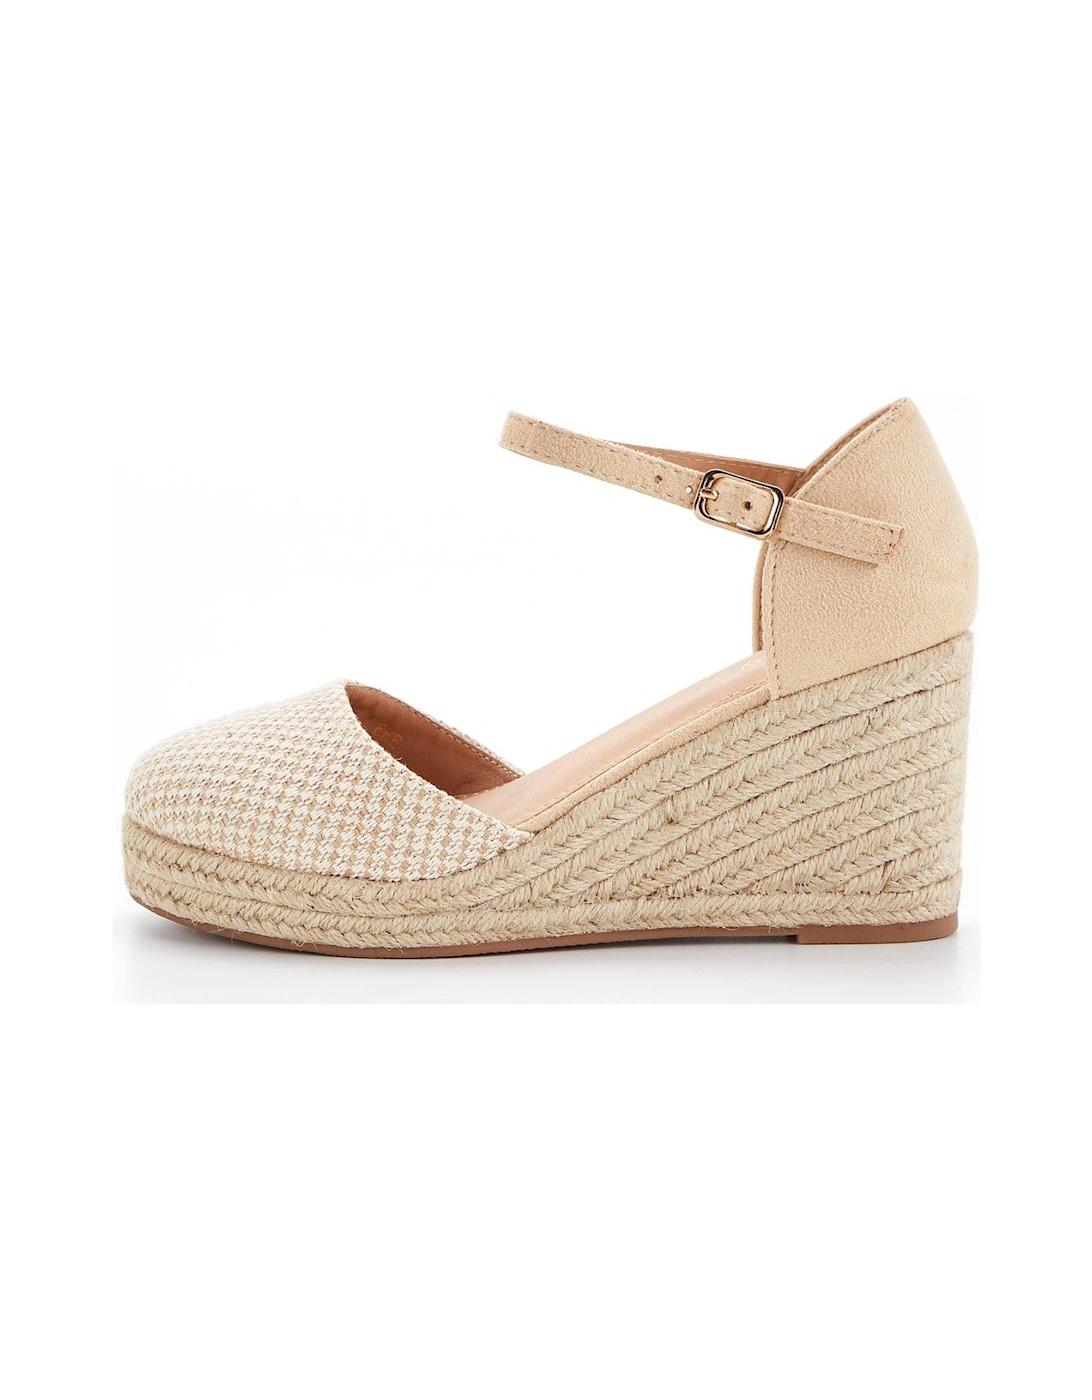 Extra Wide Wedge Sandal - Cream, 7 of 6